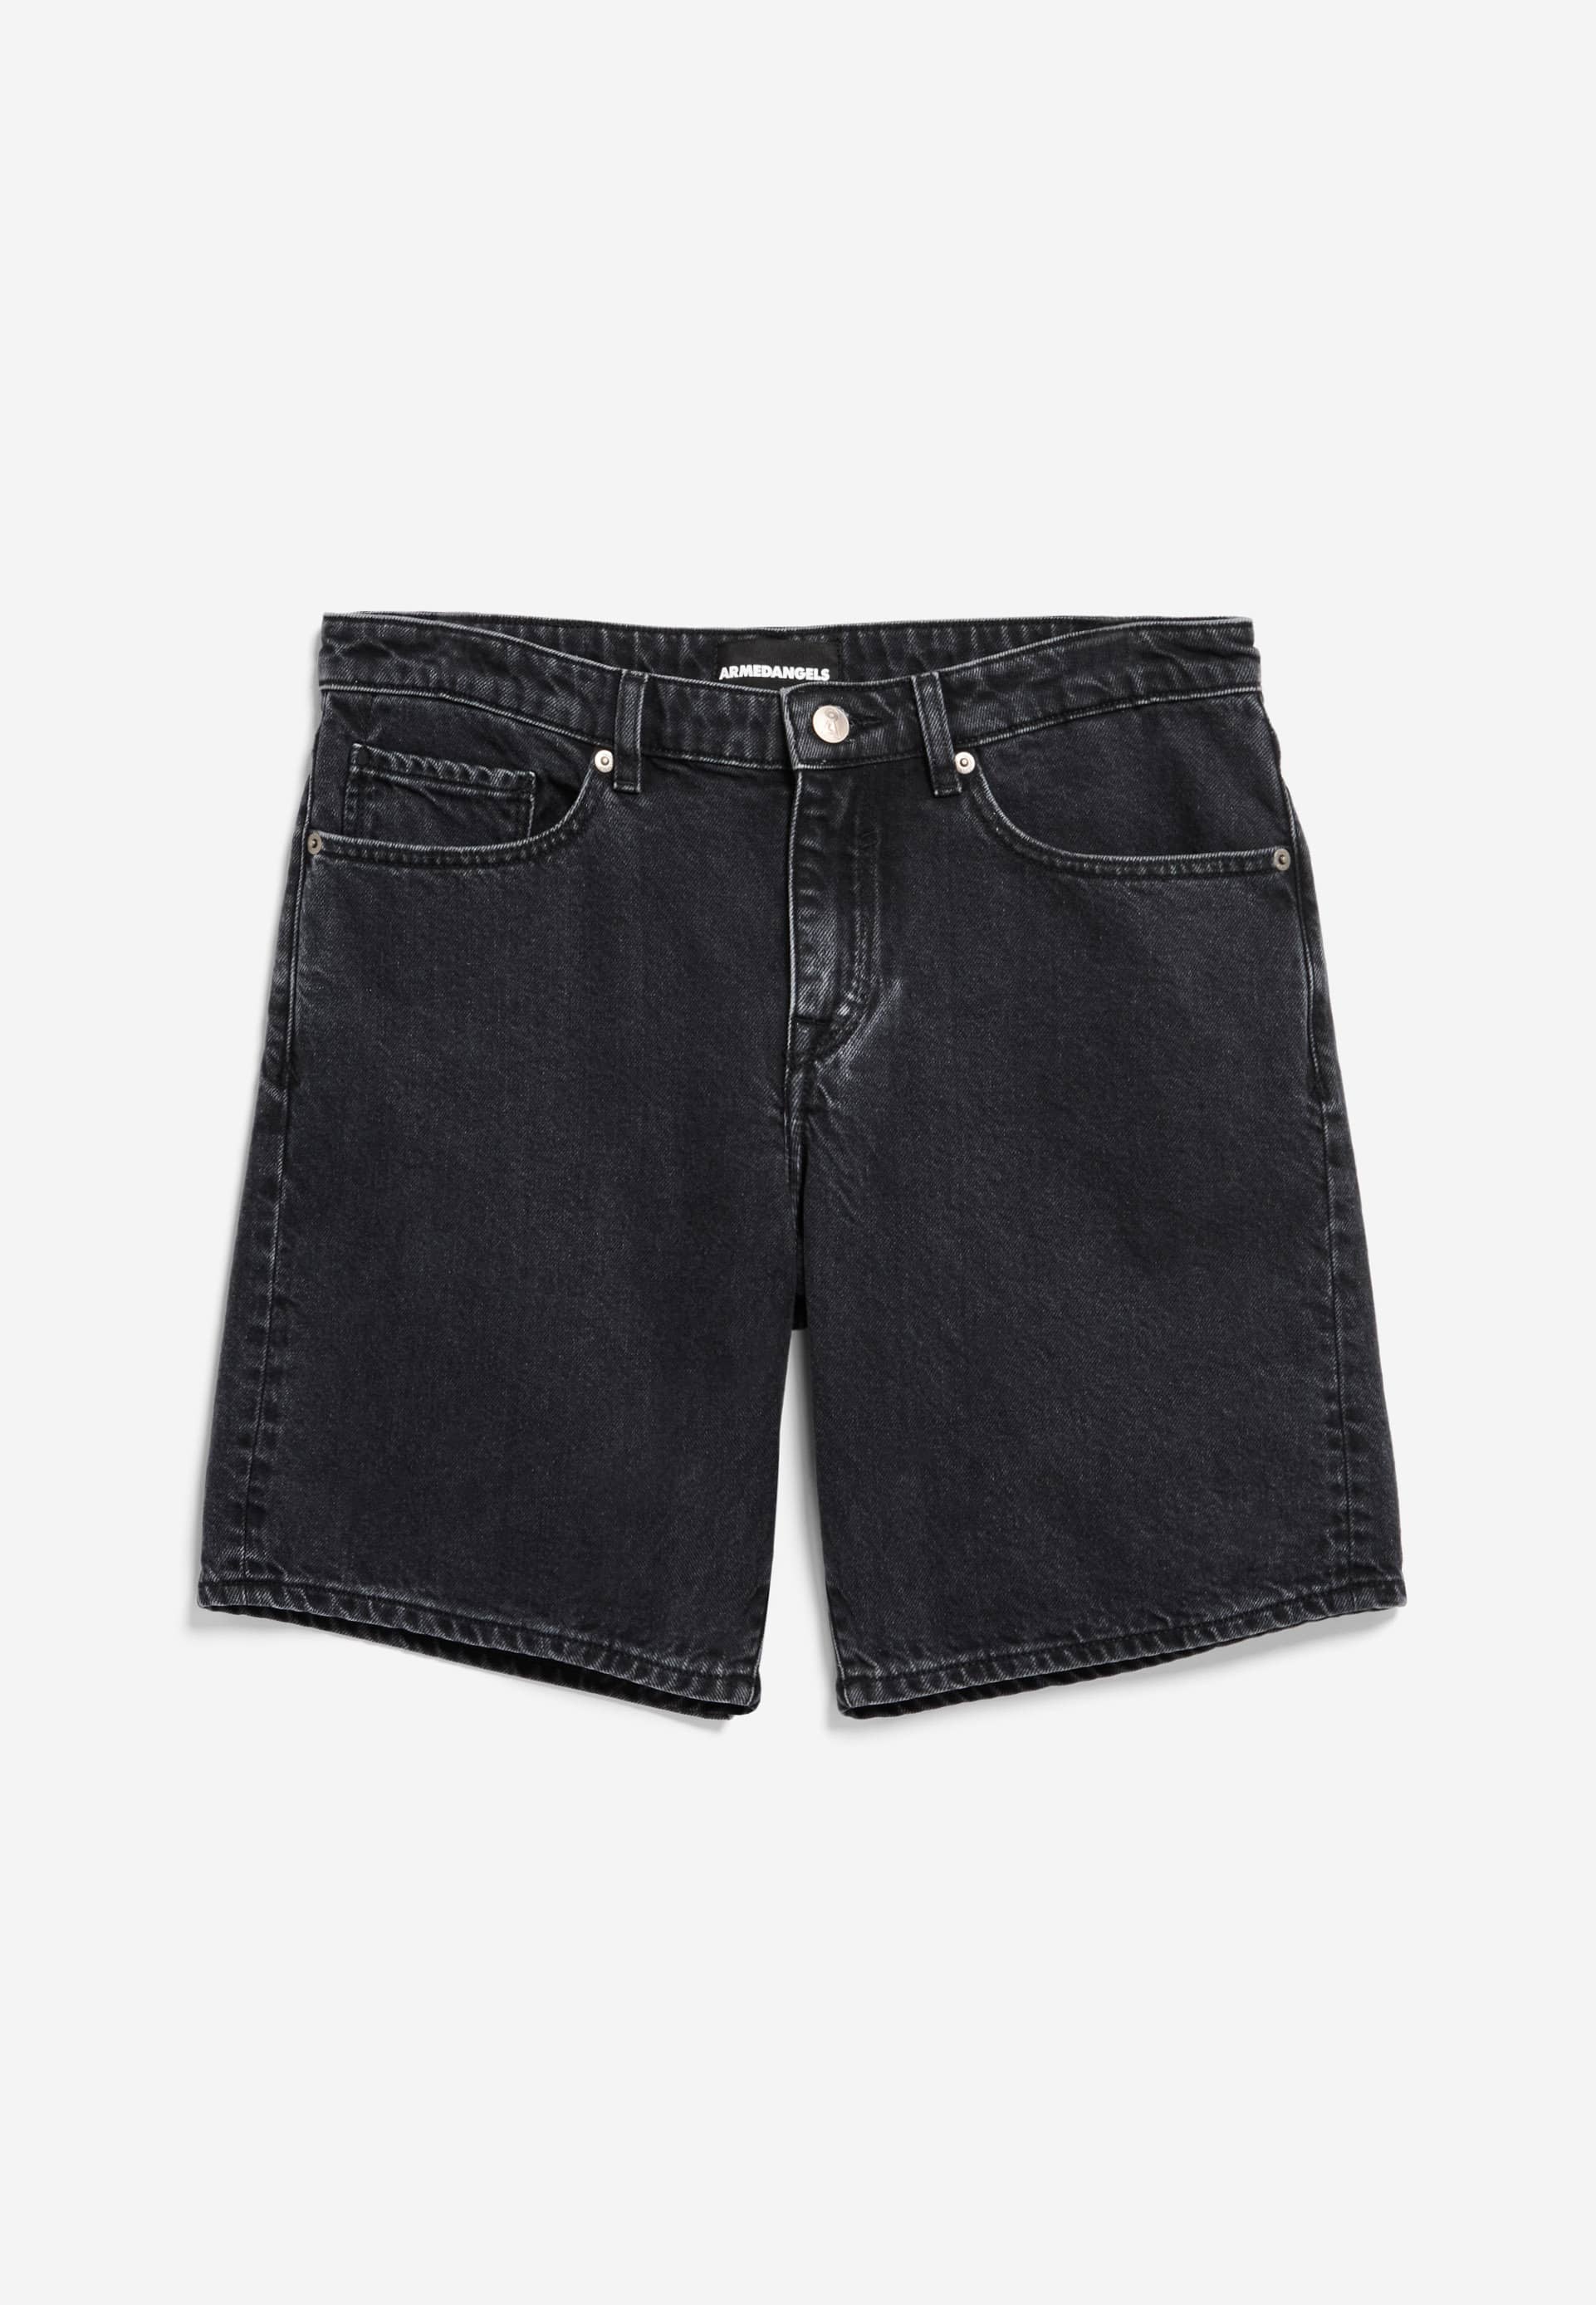 AARVO Jeans Shorts aus recycelter Baumwolle